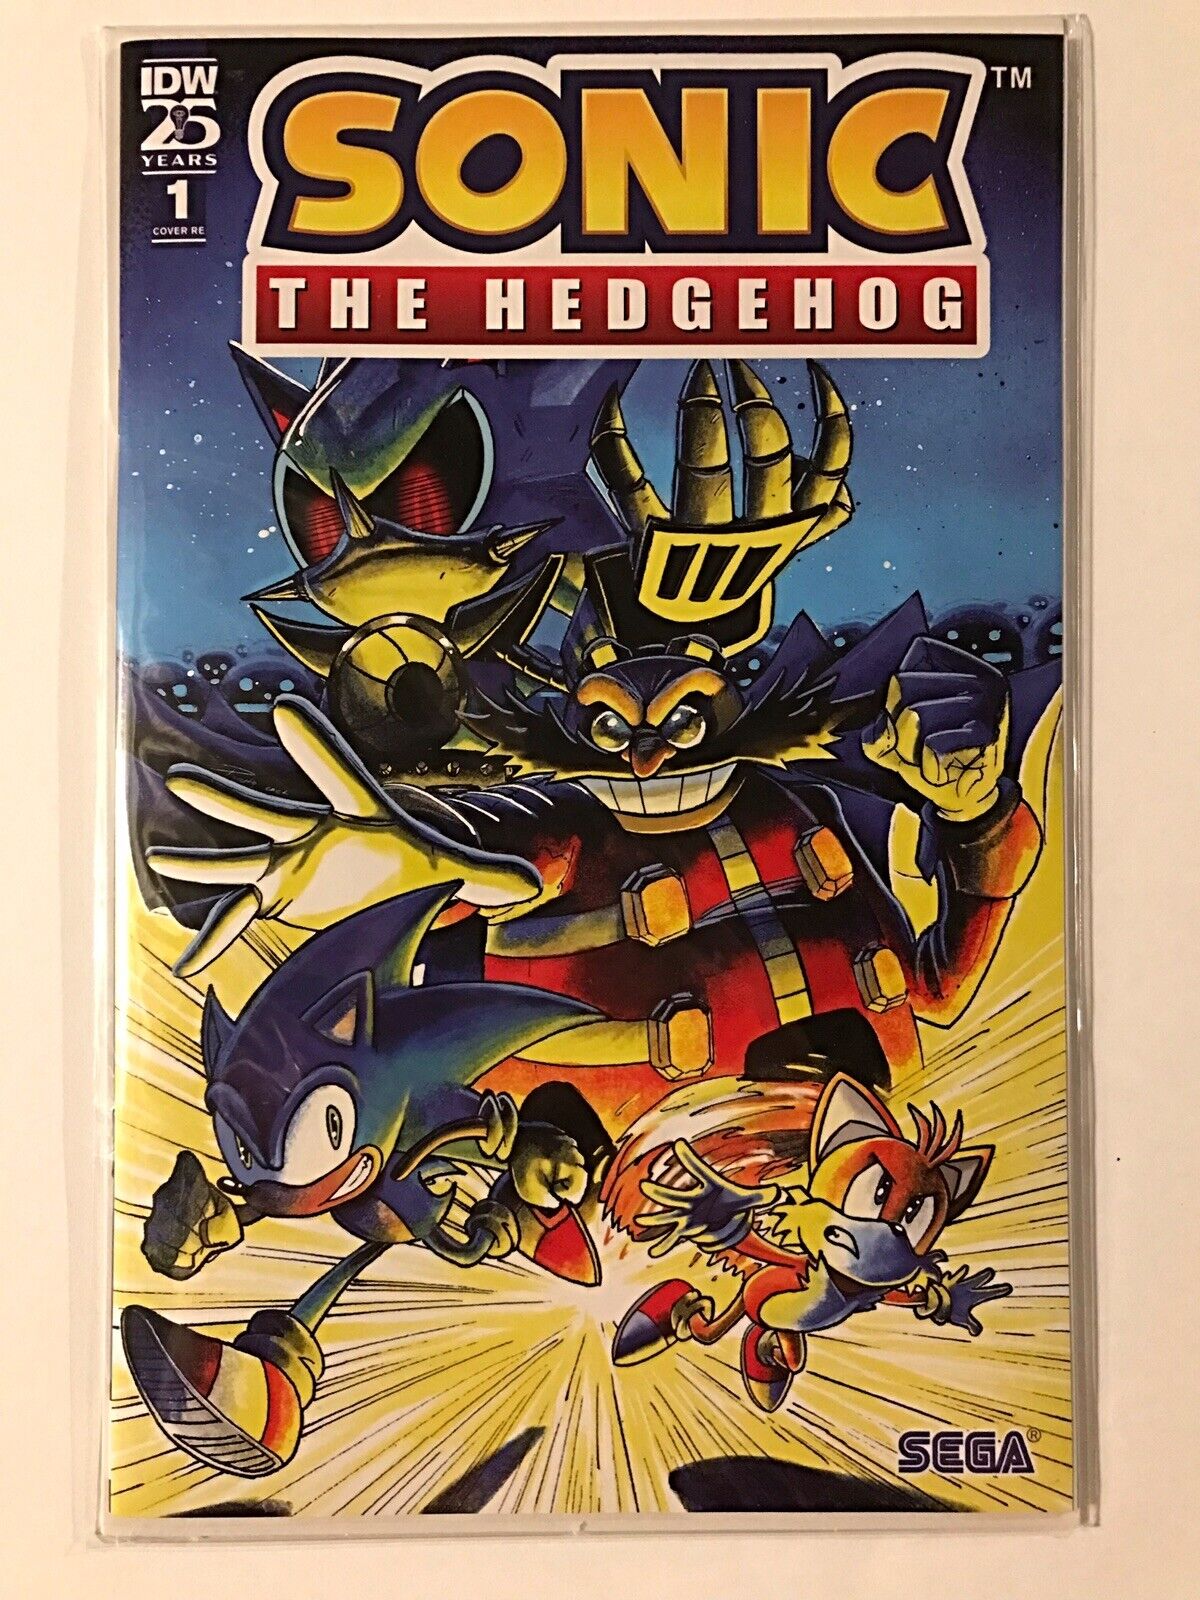 Sonic The Hedgehog (IDW Comics) - Issue #1 C2E2 Exclusive Poncho Variant NM